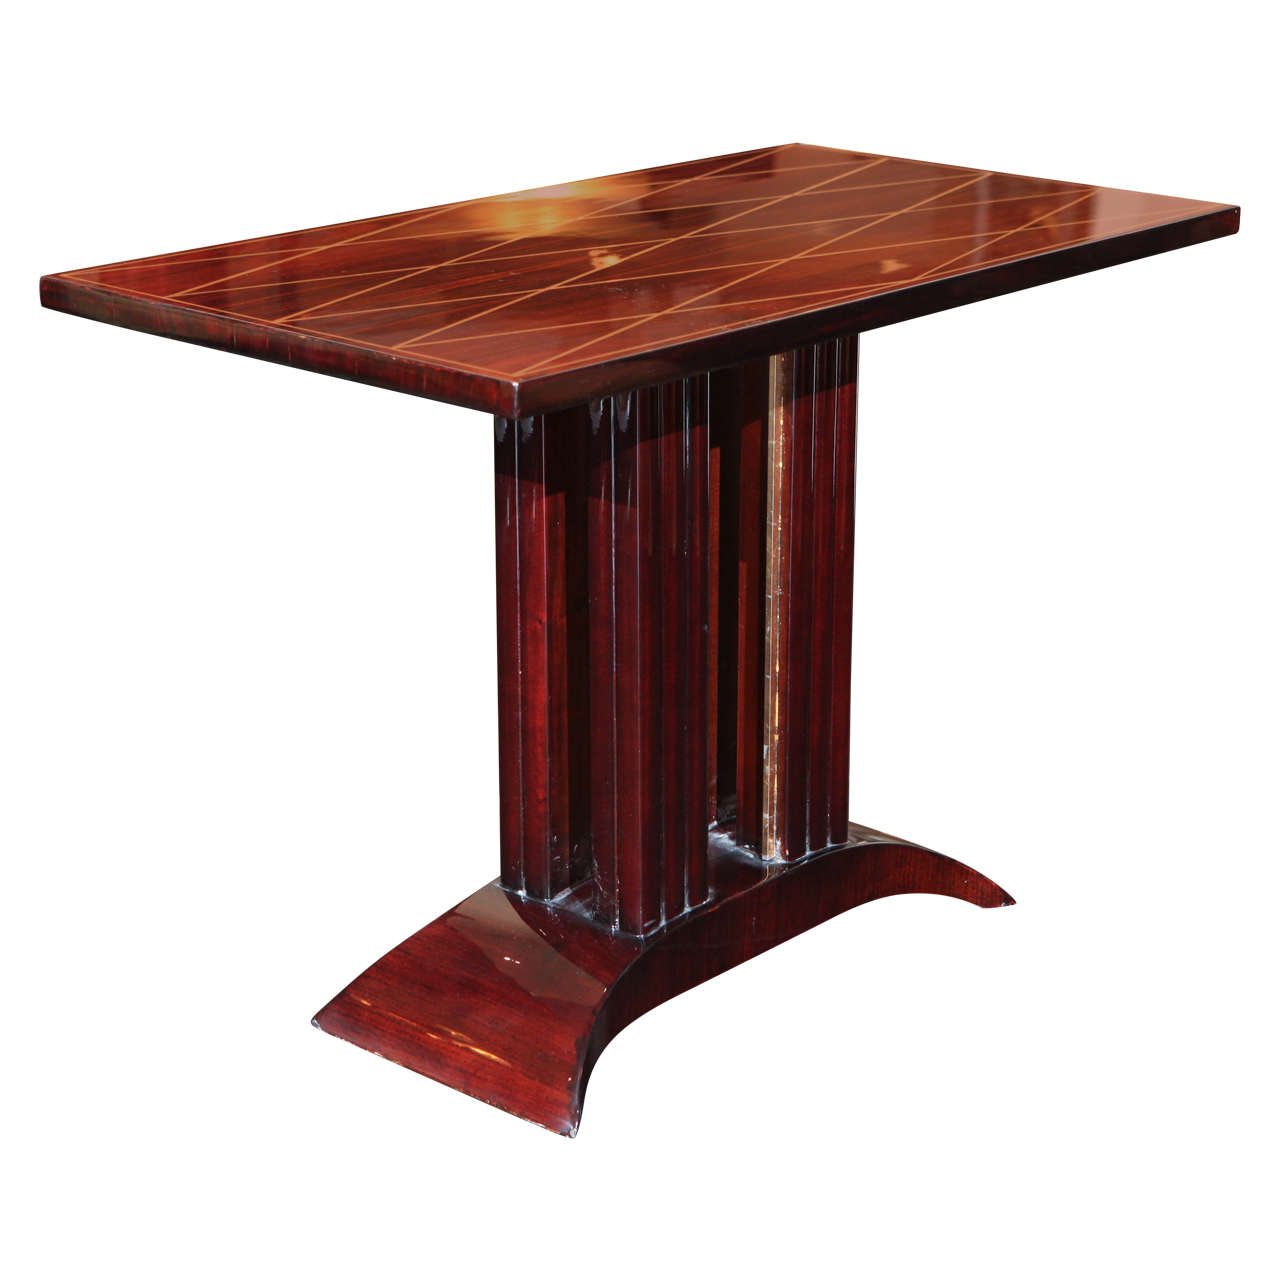 Side table in brazilian rosewood with gold leaf marquetry on surface. Dark Palisander fluted legs and base with gold leaf detailing.